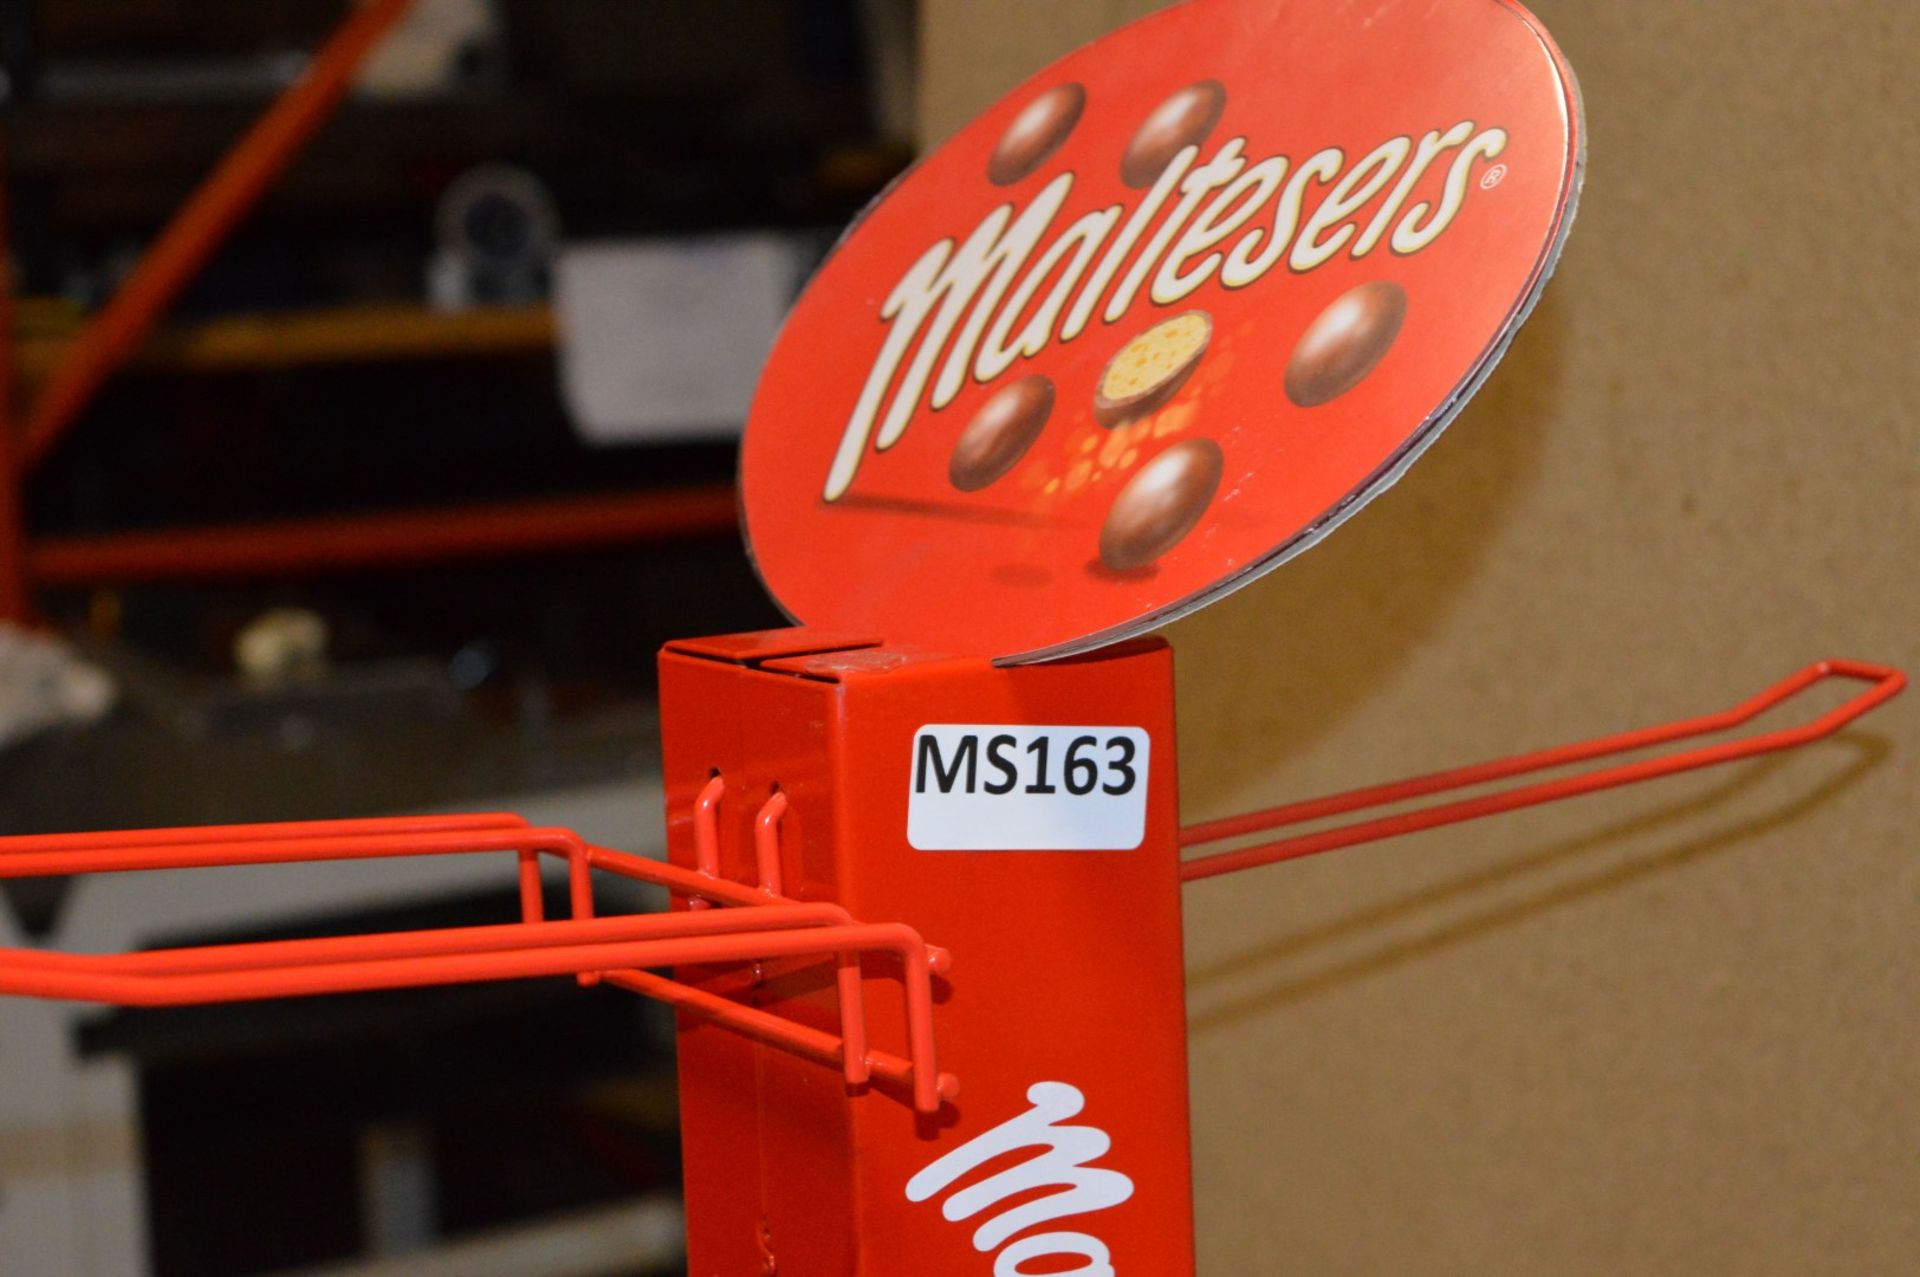 1 x Maltesers Merchandise Shop Display Stand - Approx Height 140cms - CL282 - Ref MS163 - - Image 2 of 7